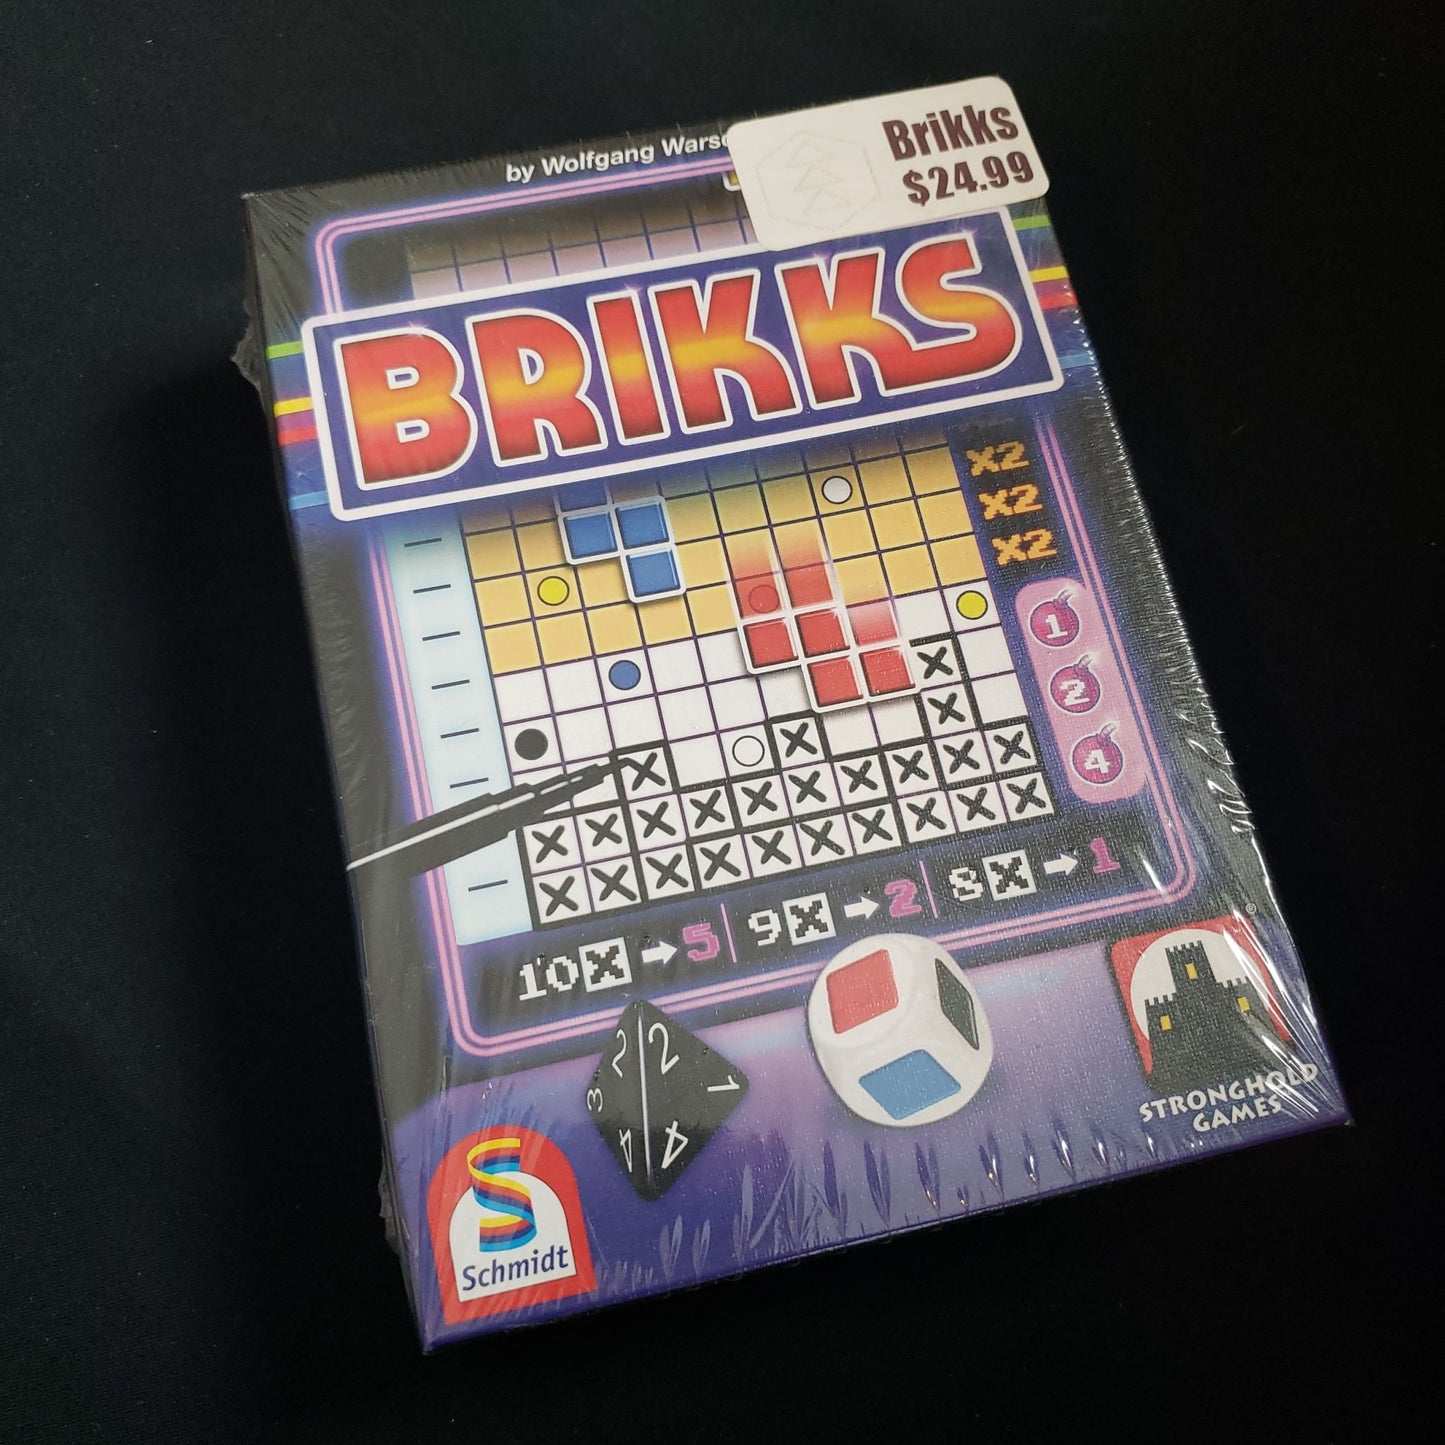 Image shows the front cover of the box of the Brikks dice game